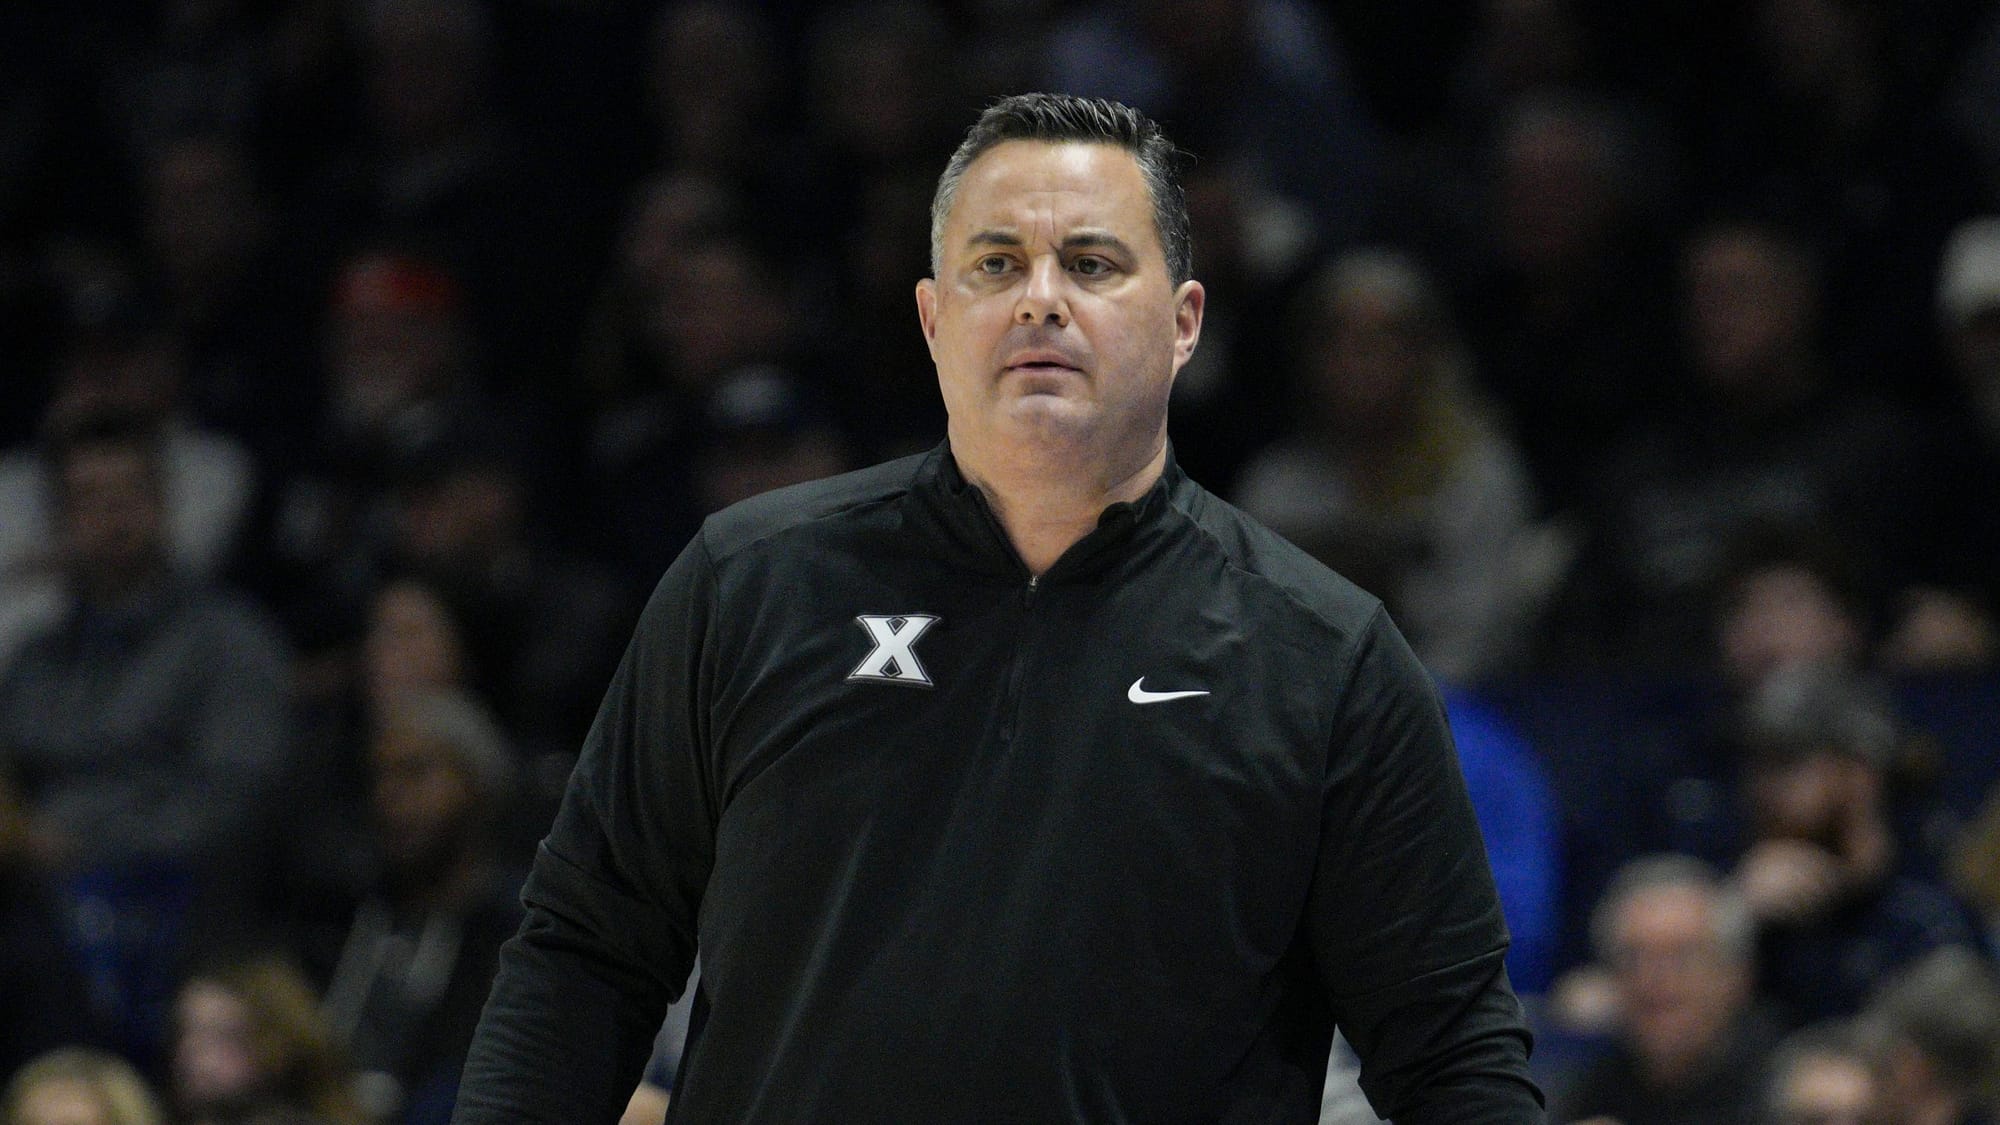 Today's college basketball betting picks and odds include a matchup between Xavier and UConn matchup in the Big East, as well as..